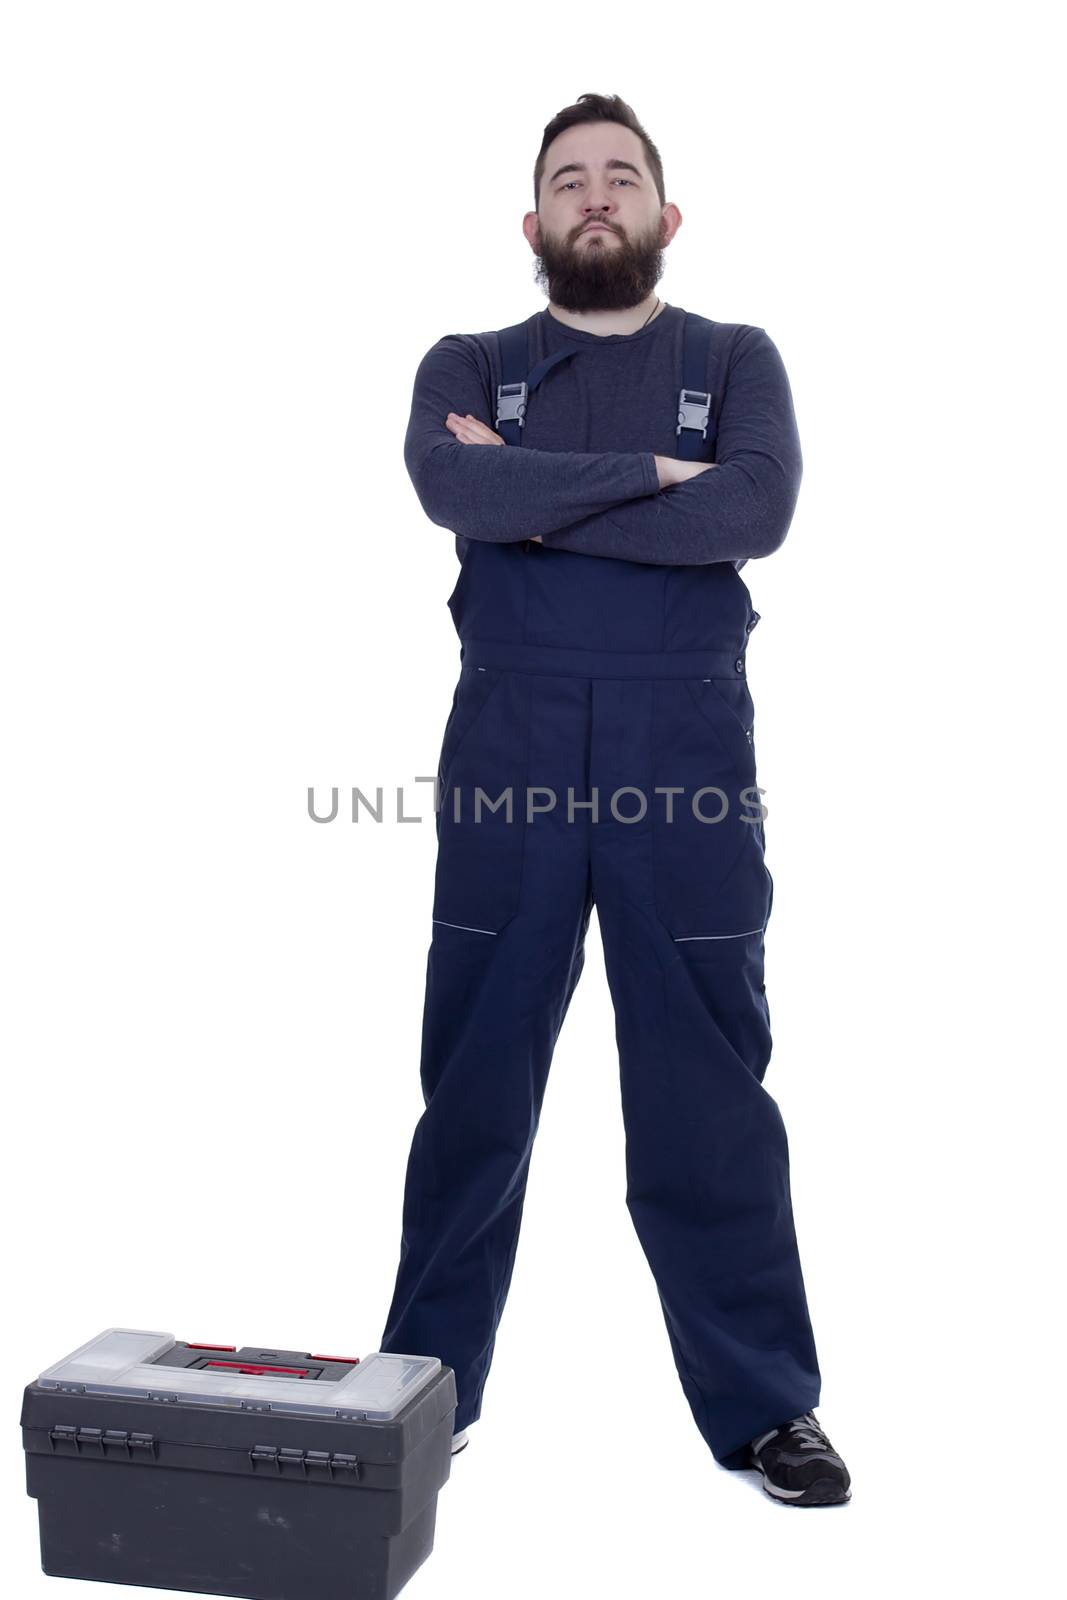 Bearded man mechanic with tool box on a white background